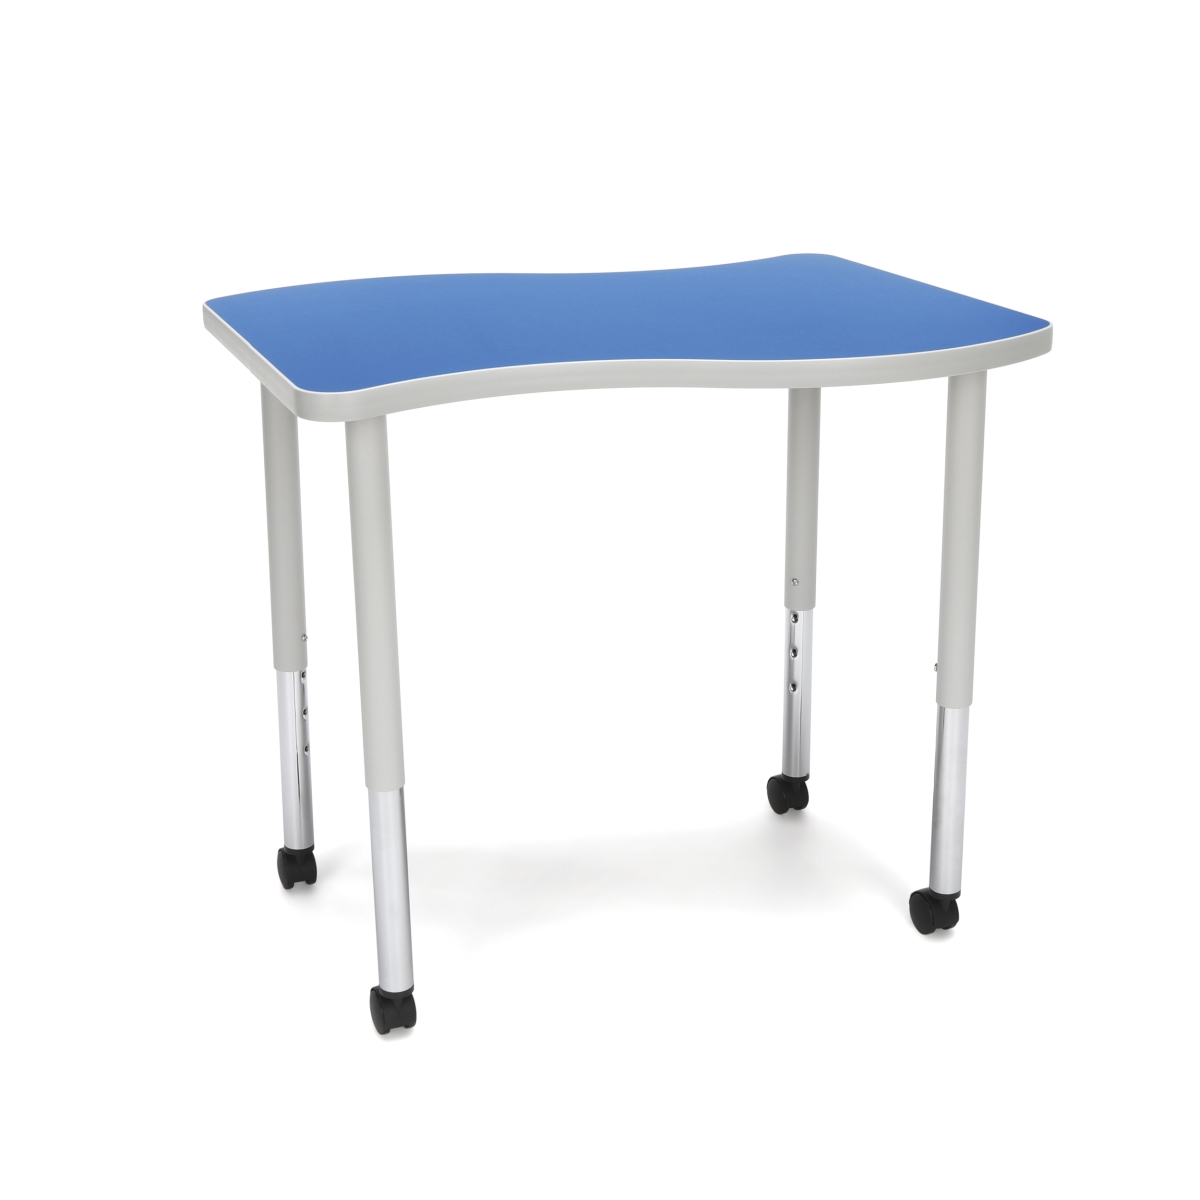 Wave-s-llc-blu Adapt Series Small Wave Standard Table - 25-33 In. Height Adjustable Desk With Casters, Blue